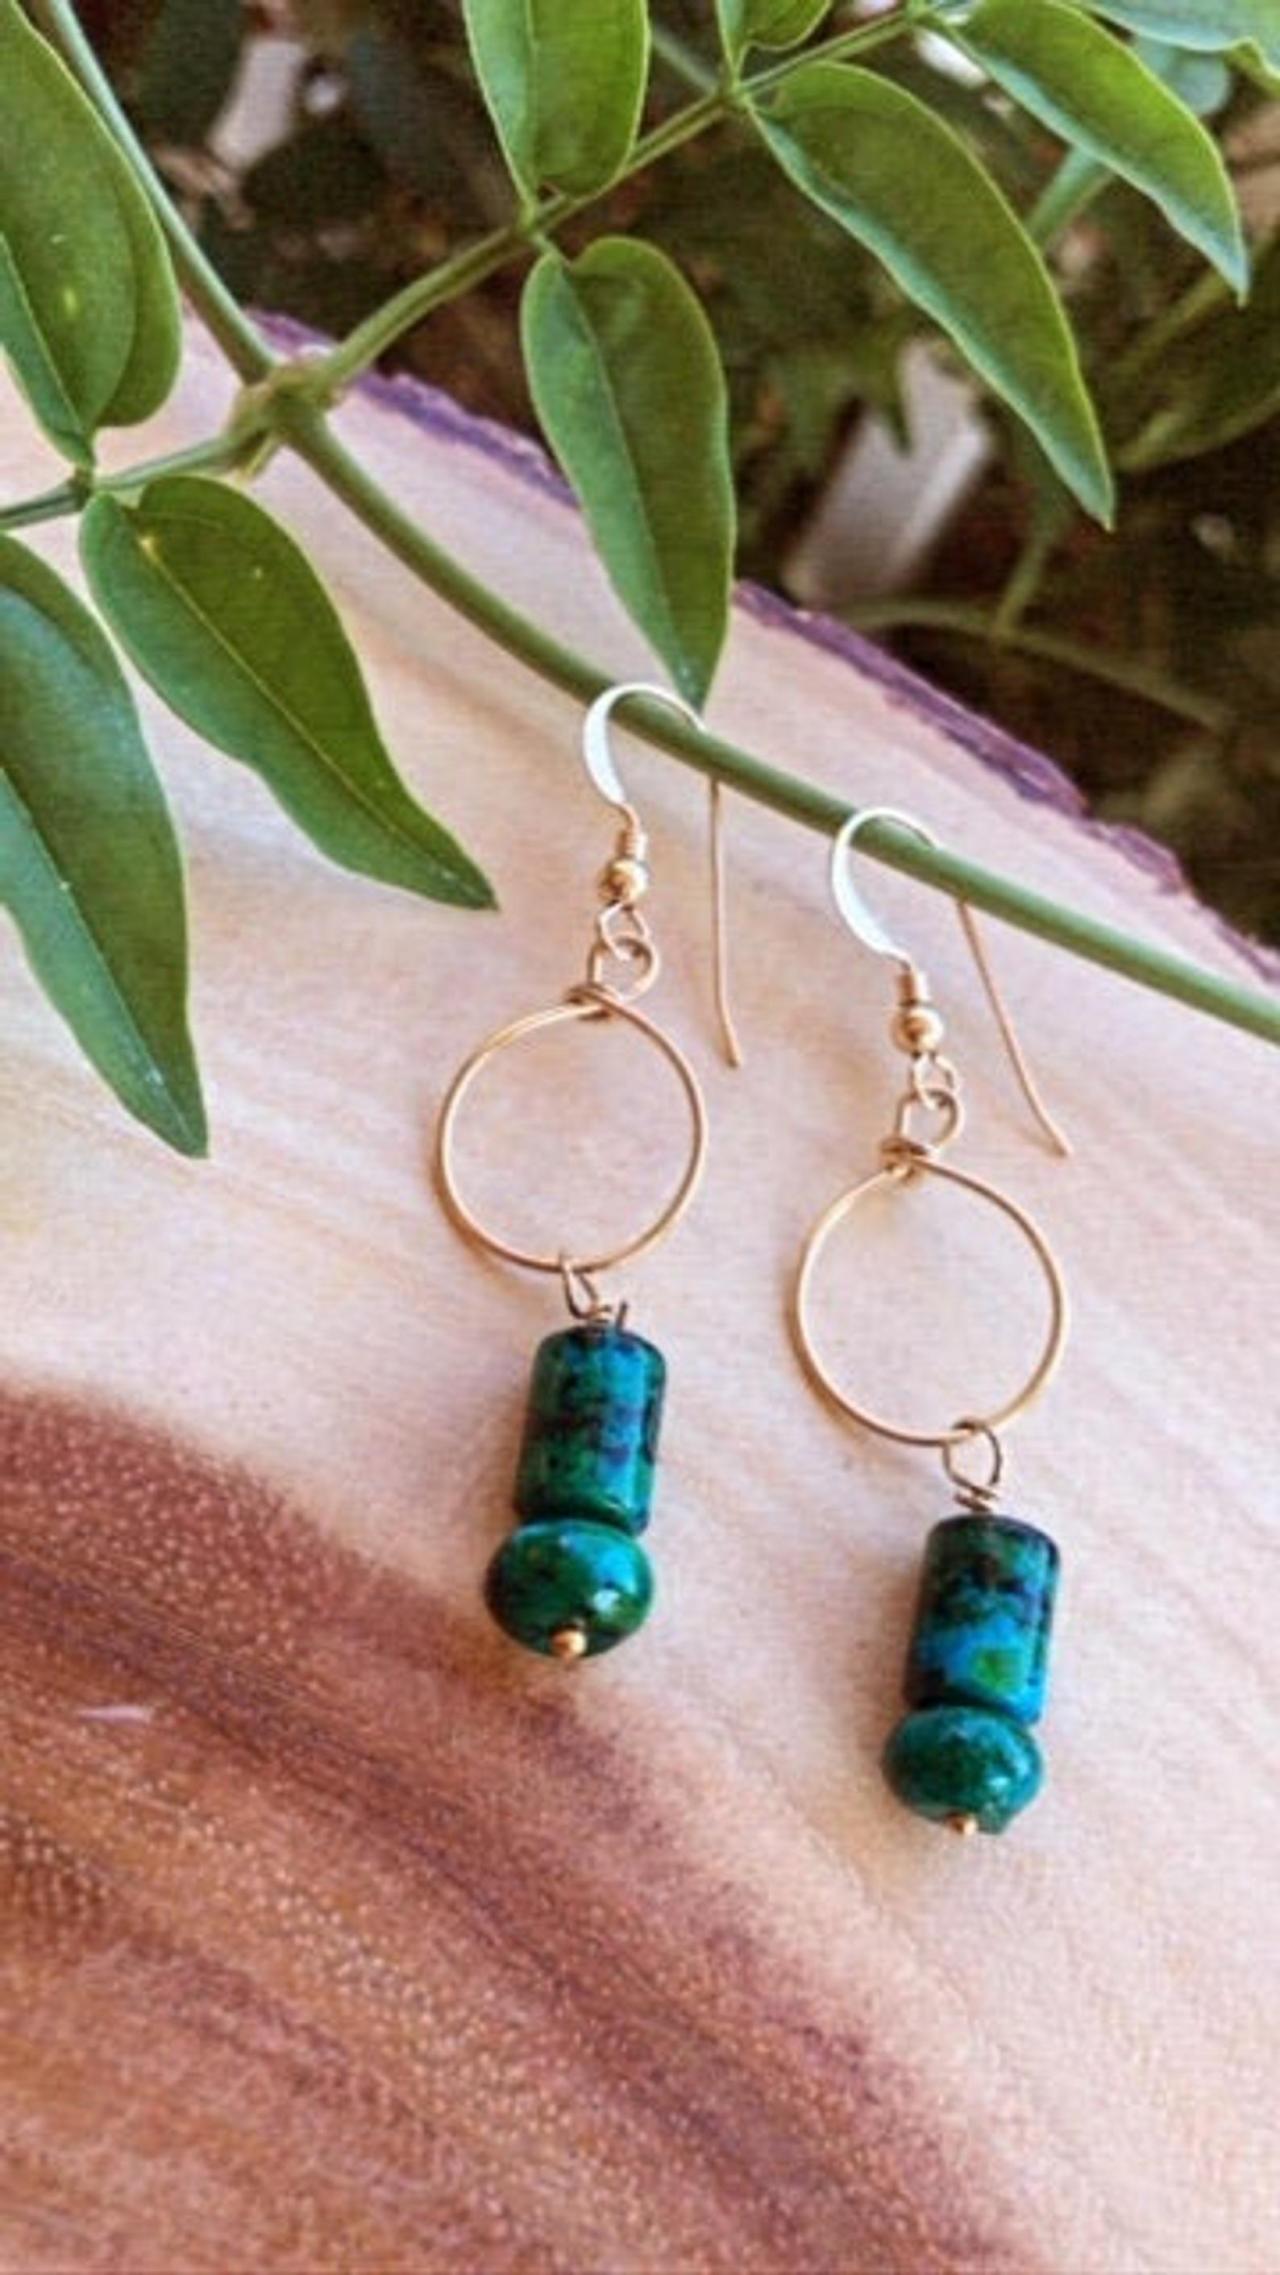 Turquoise Gemstone Earrings; Crystal Earrings; 14k Gold Filled Jewelry; Wire Wrapped Jewelry; Natural Turquoise; Dangle Earrings